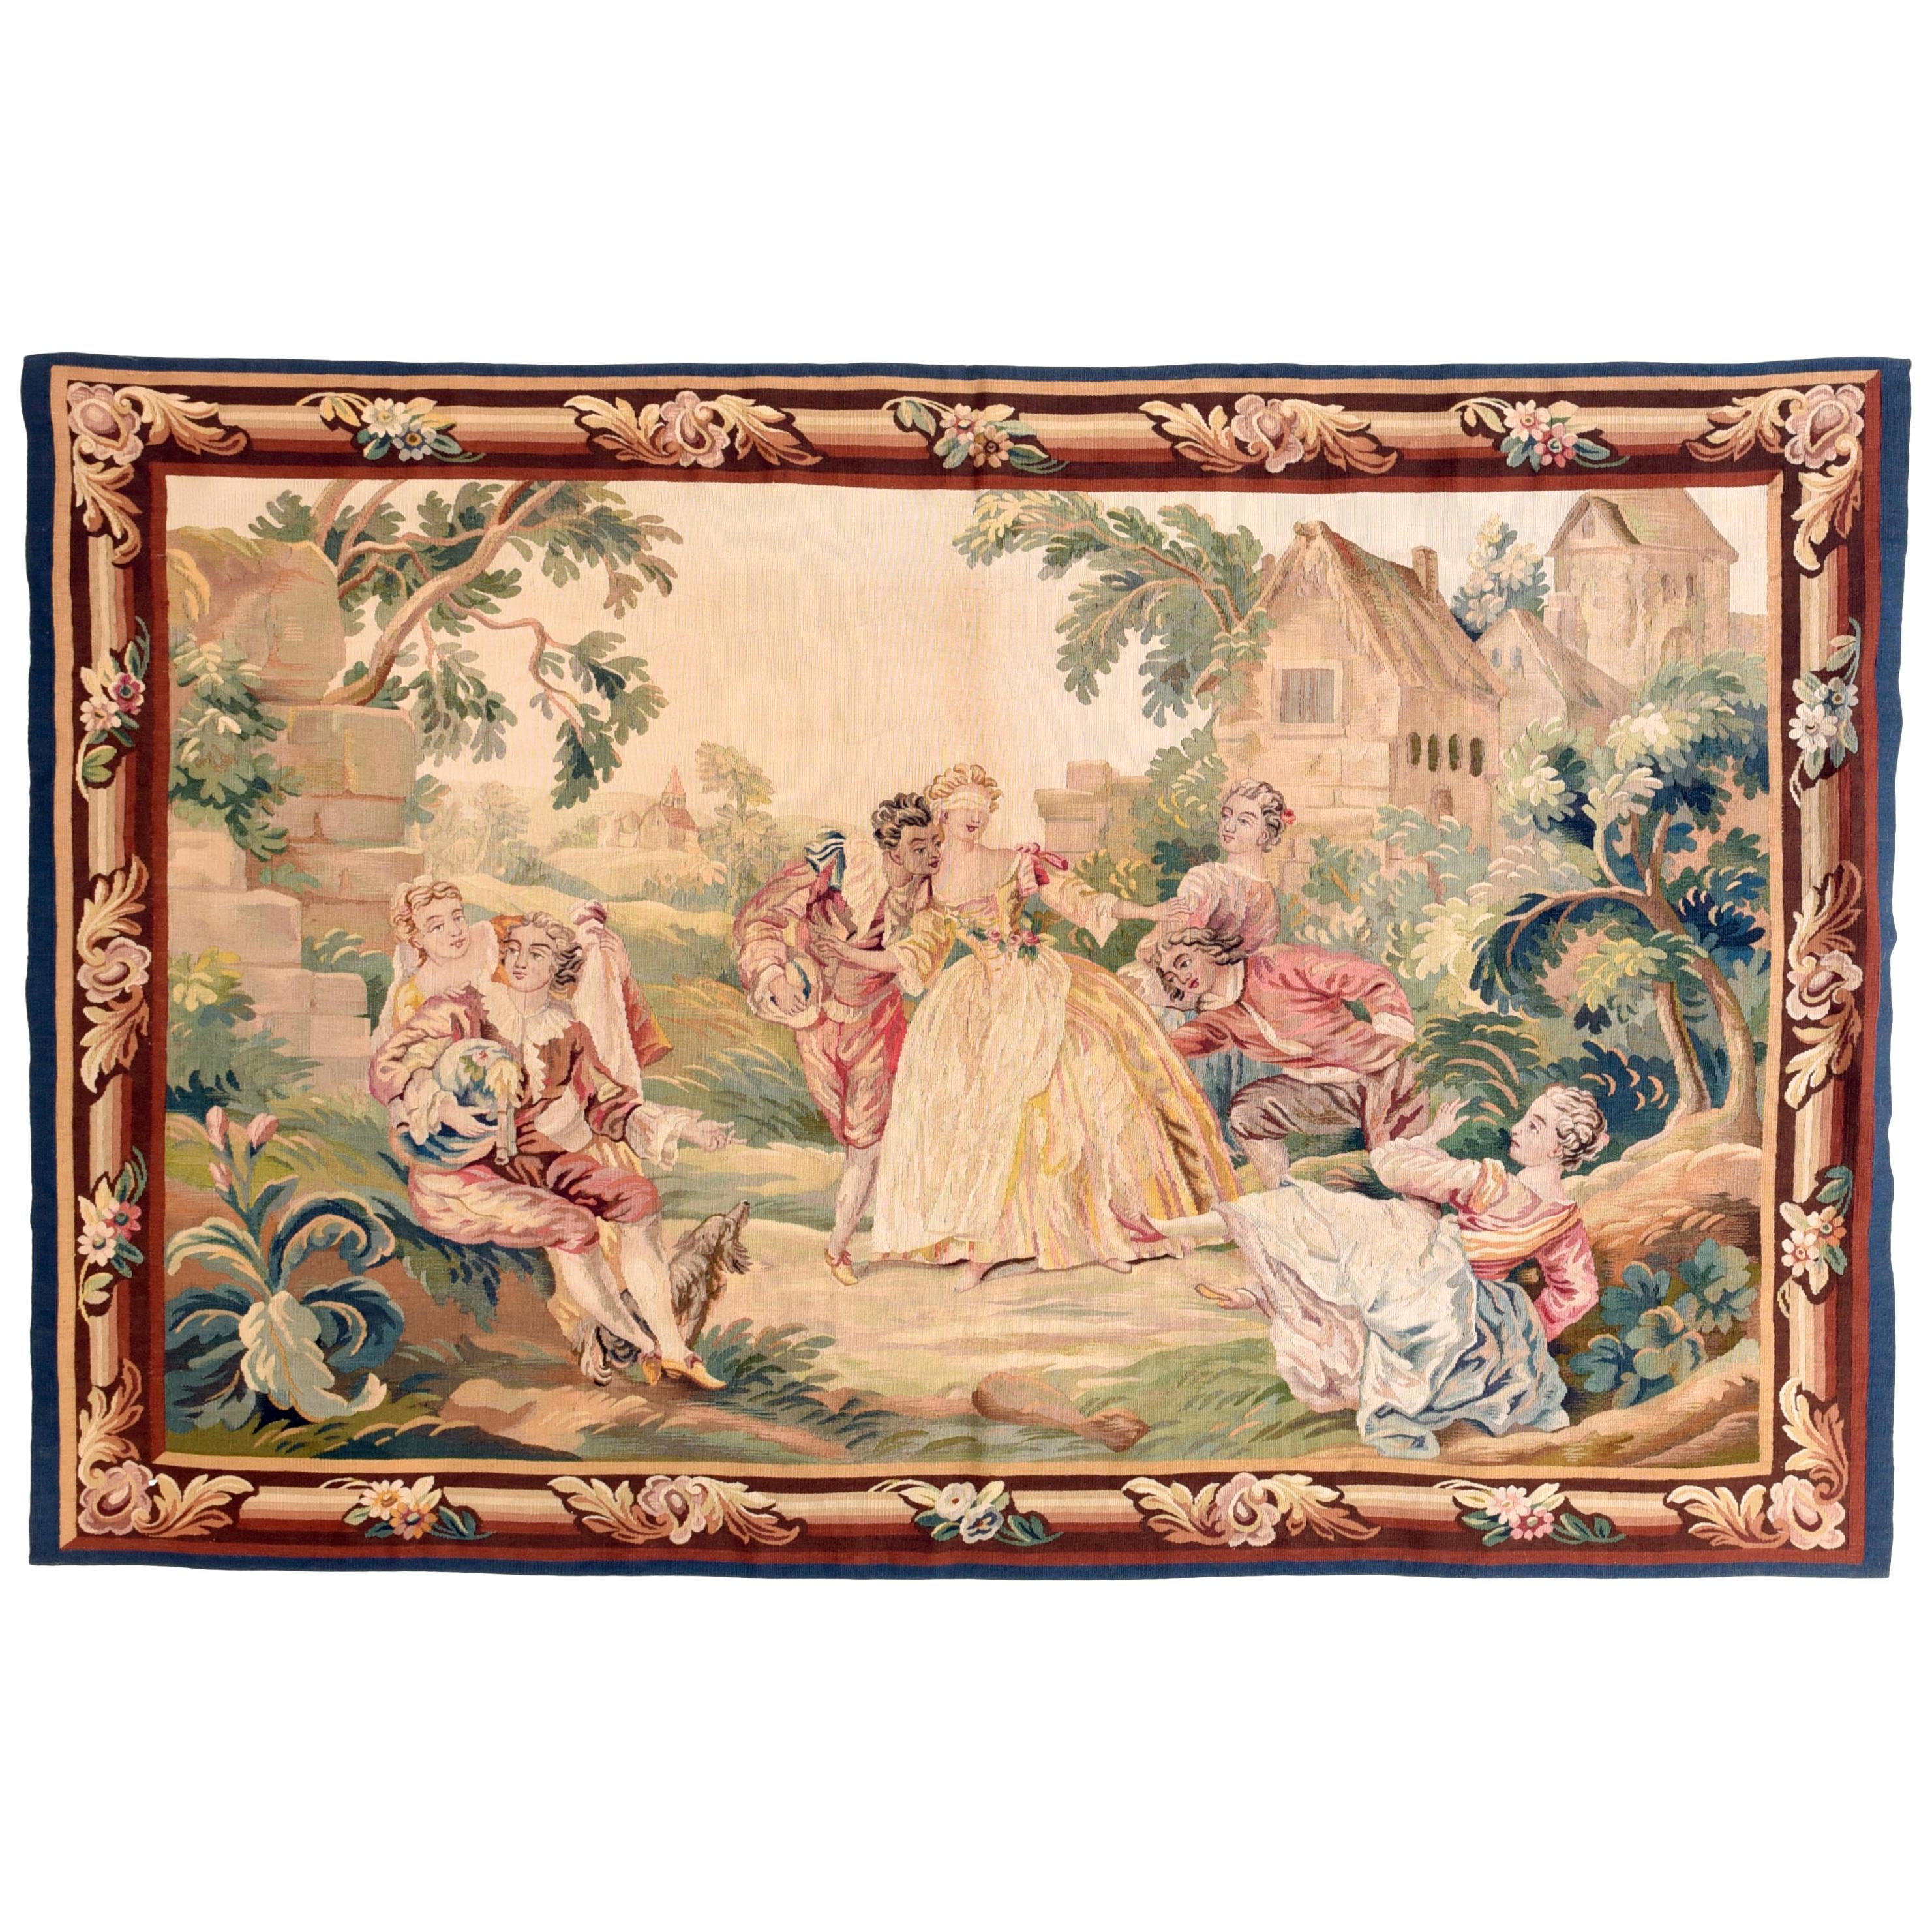 Extremly Fine Antique Aubusson French Pictorial Tapestry, circa 19th Century